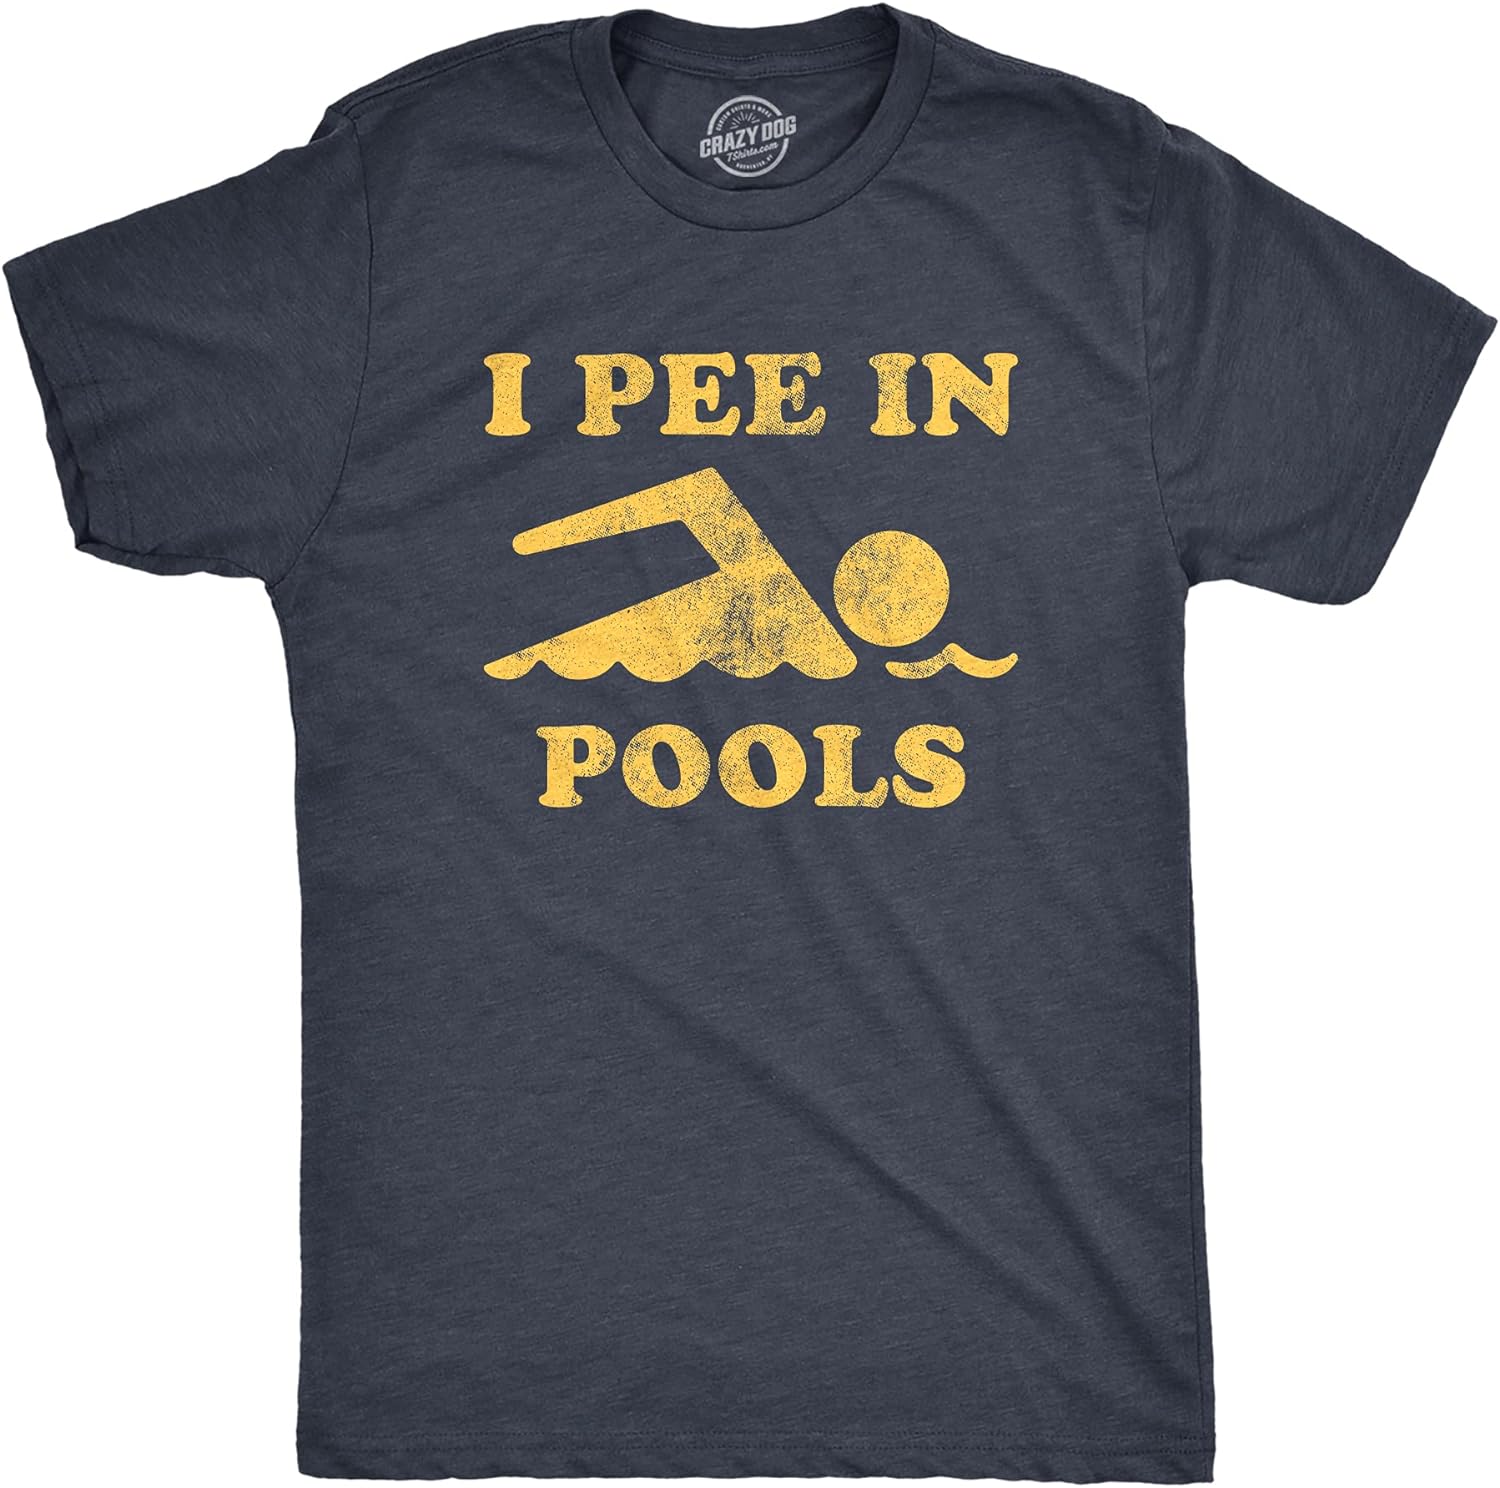 Mens Pee in Pools Funny Tshirt Review